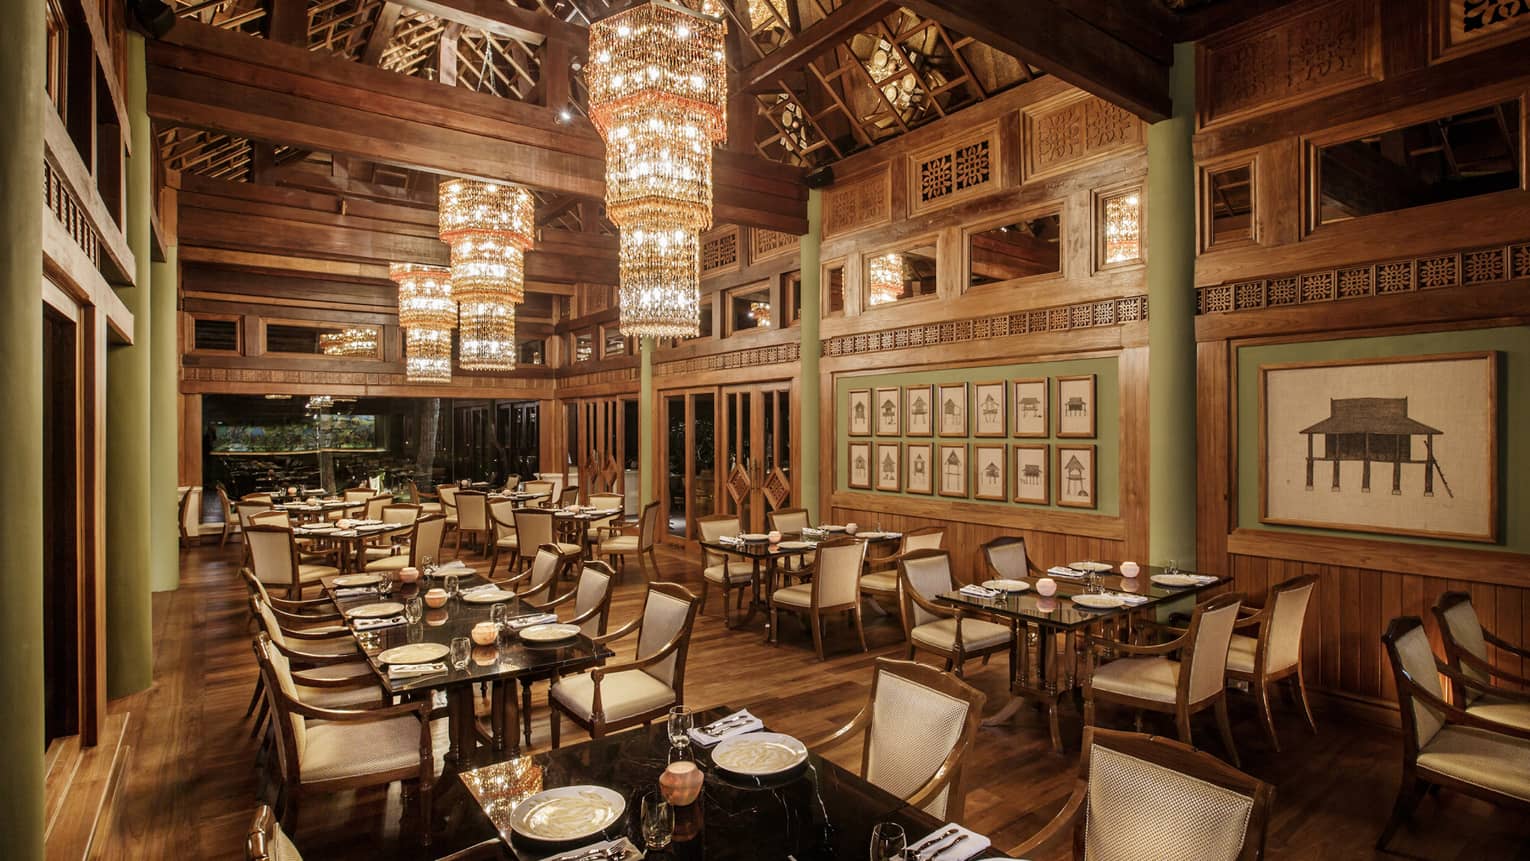 Long crystal chandeliers hang from high ceilings over KHAO indoor dining room with wood decor